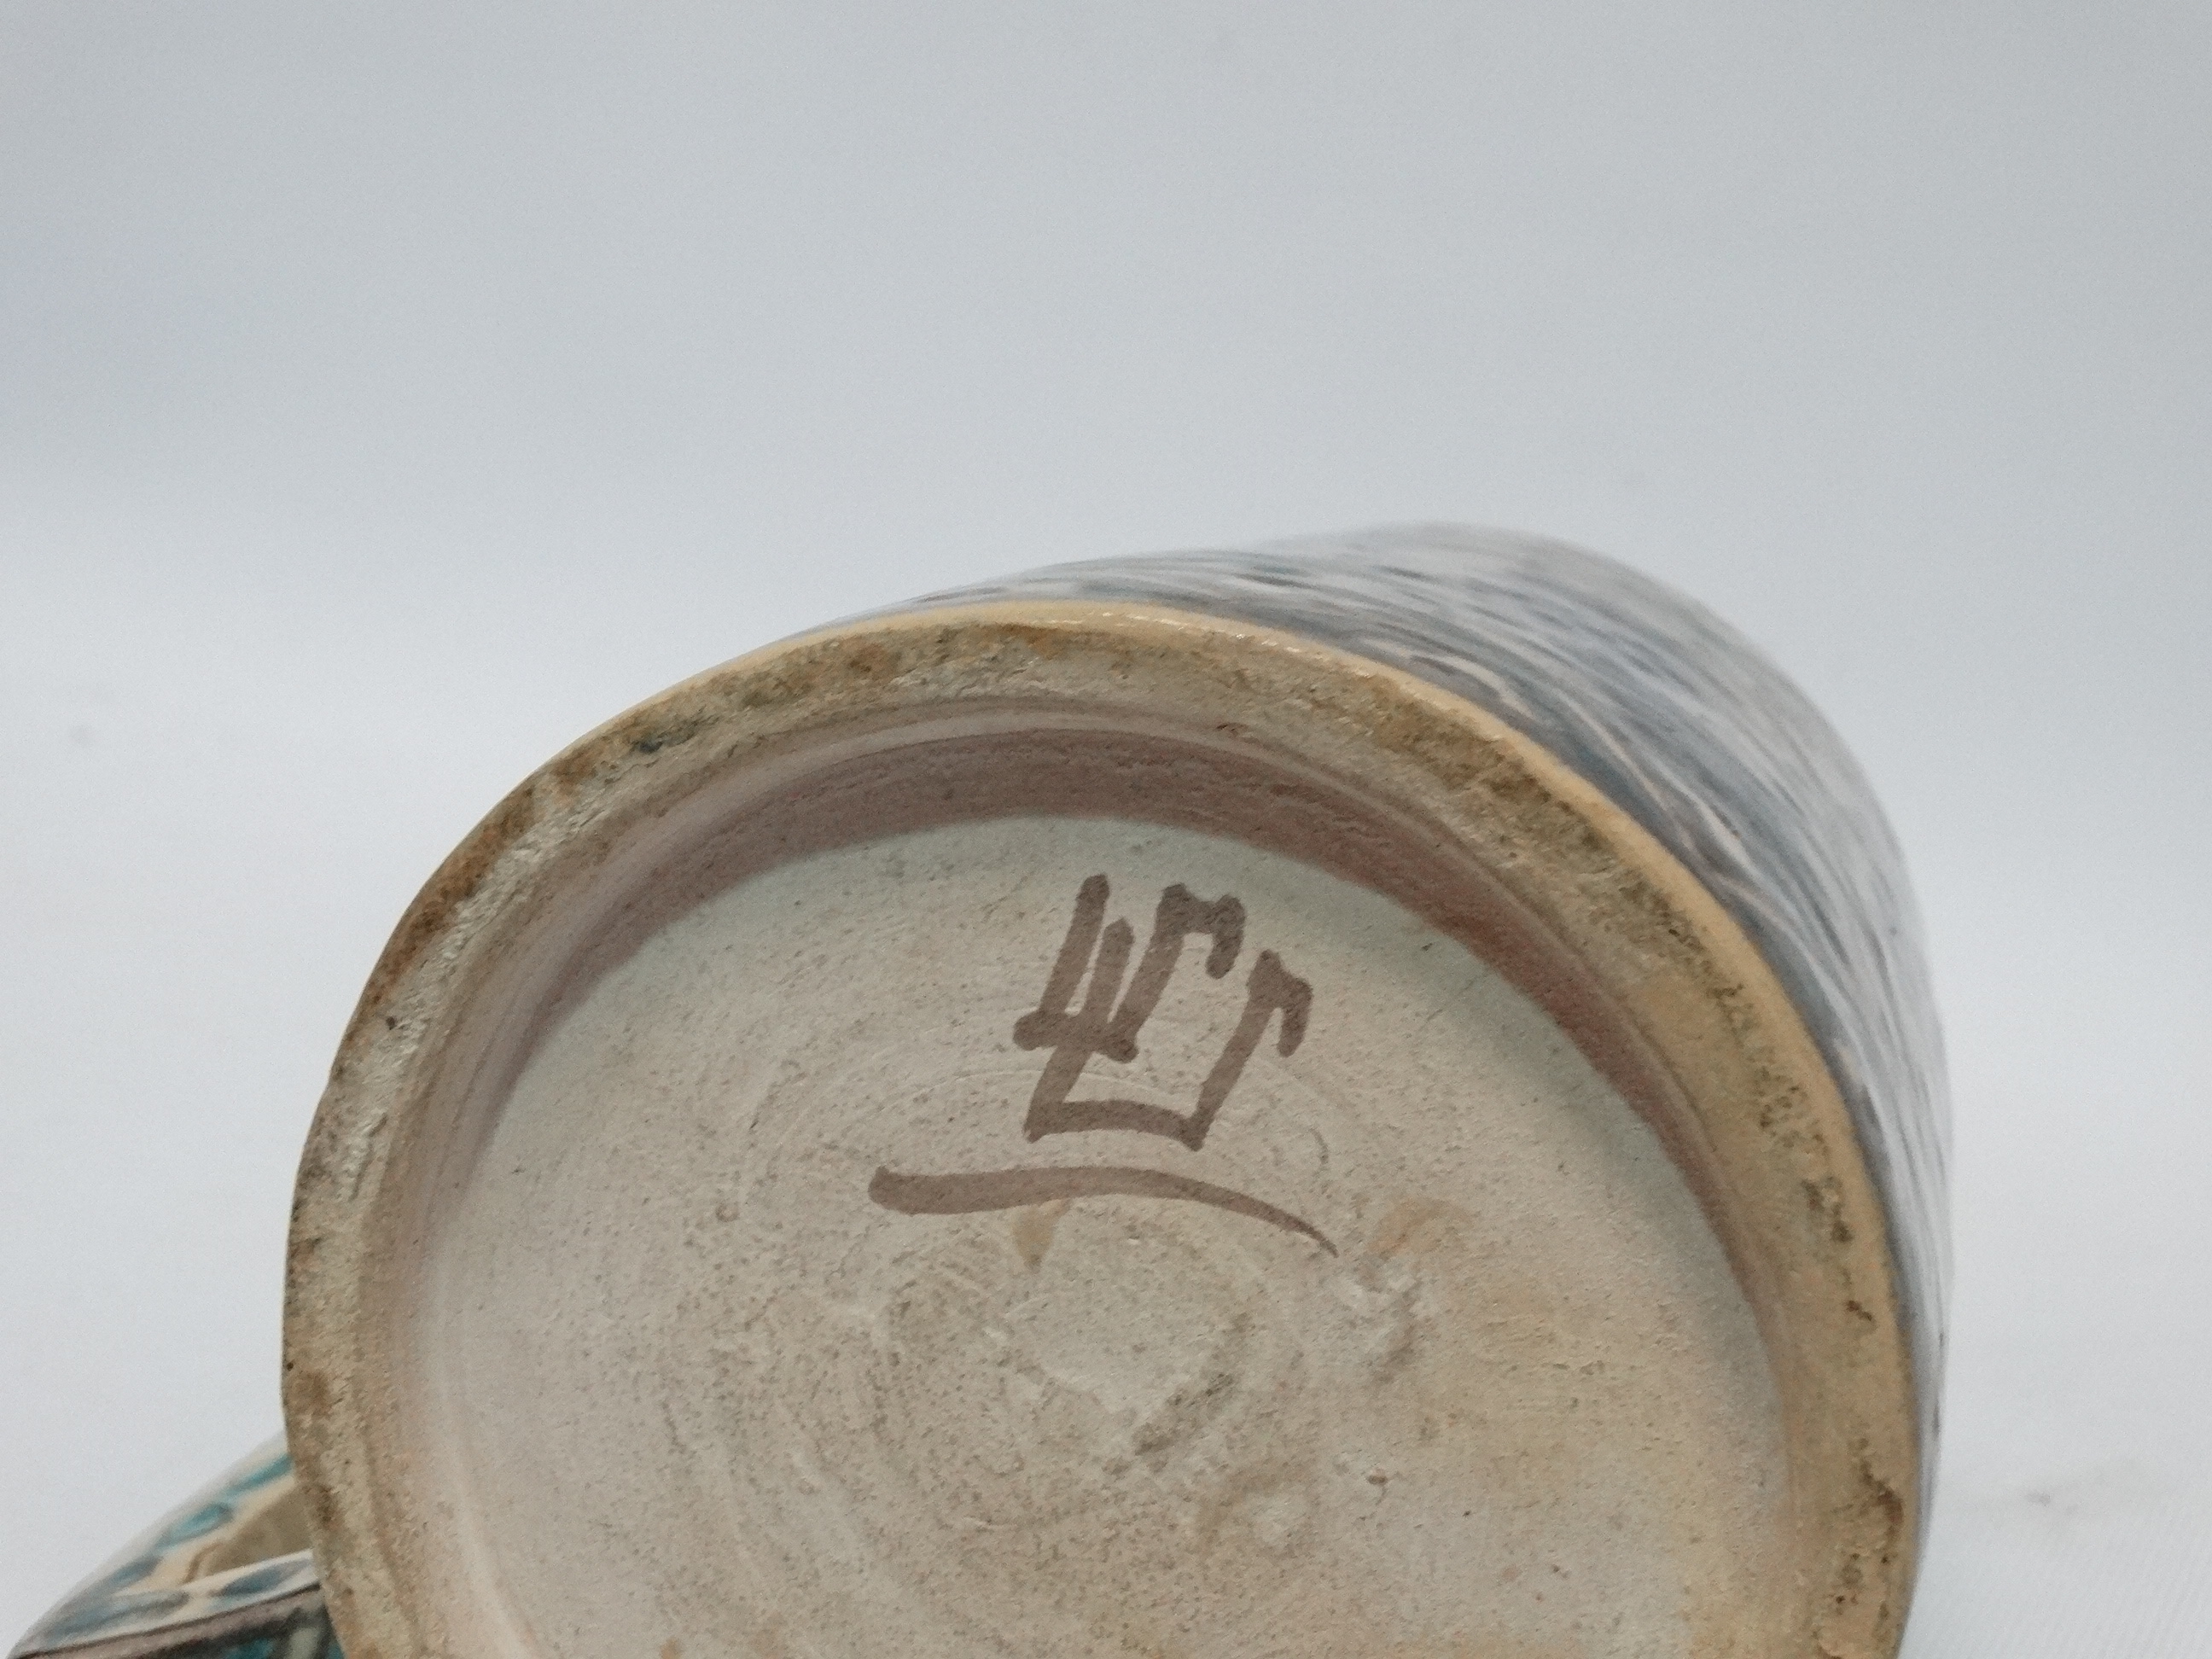 An Iznic glazed mug - decorated with vines within a geometric border, height 15cm. - Image 3 of 3